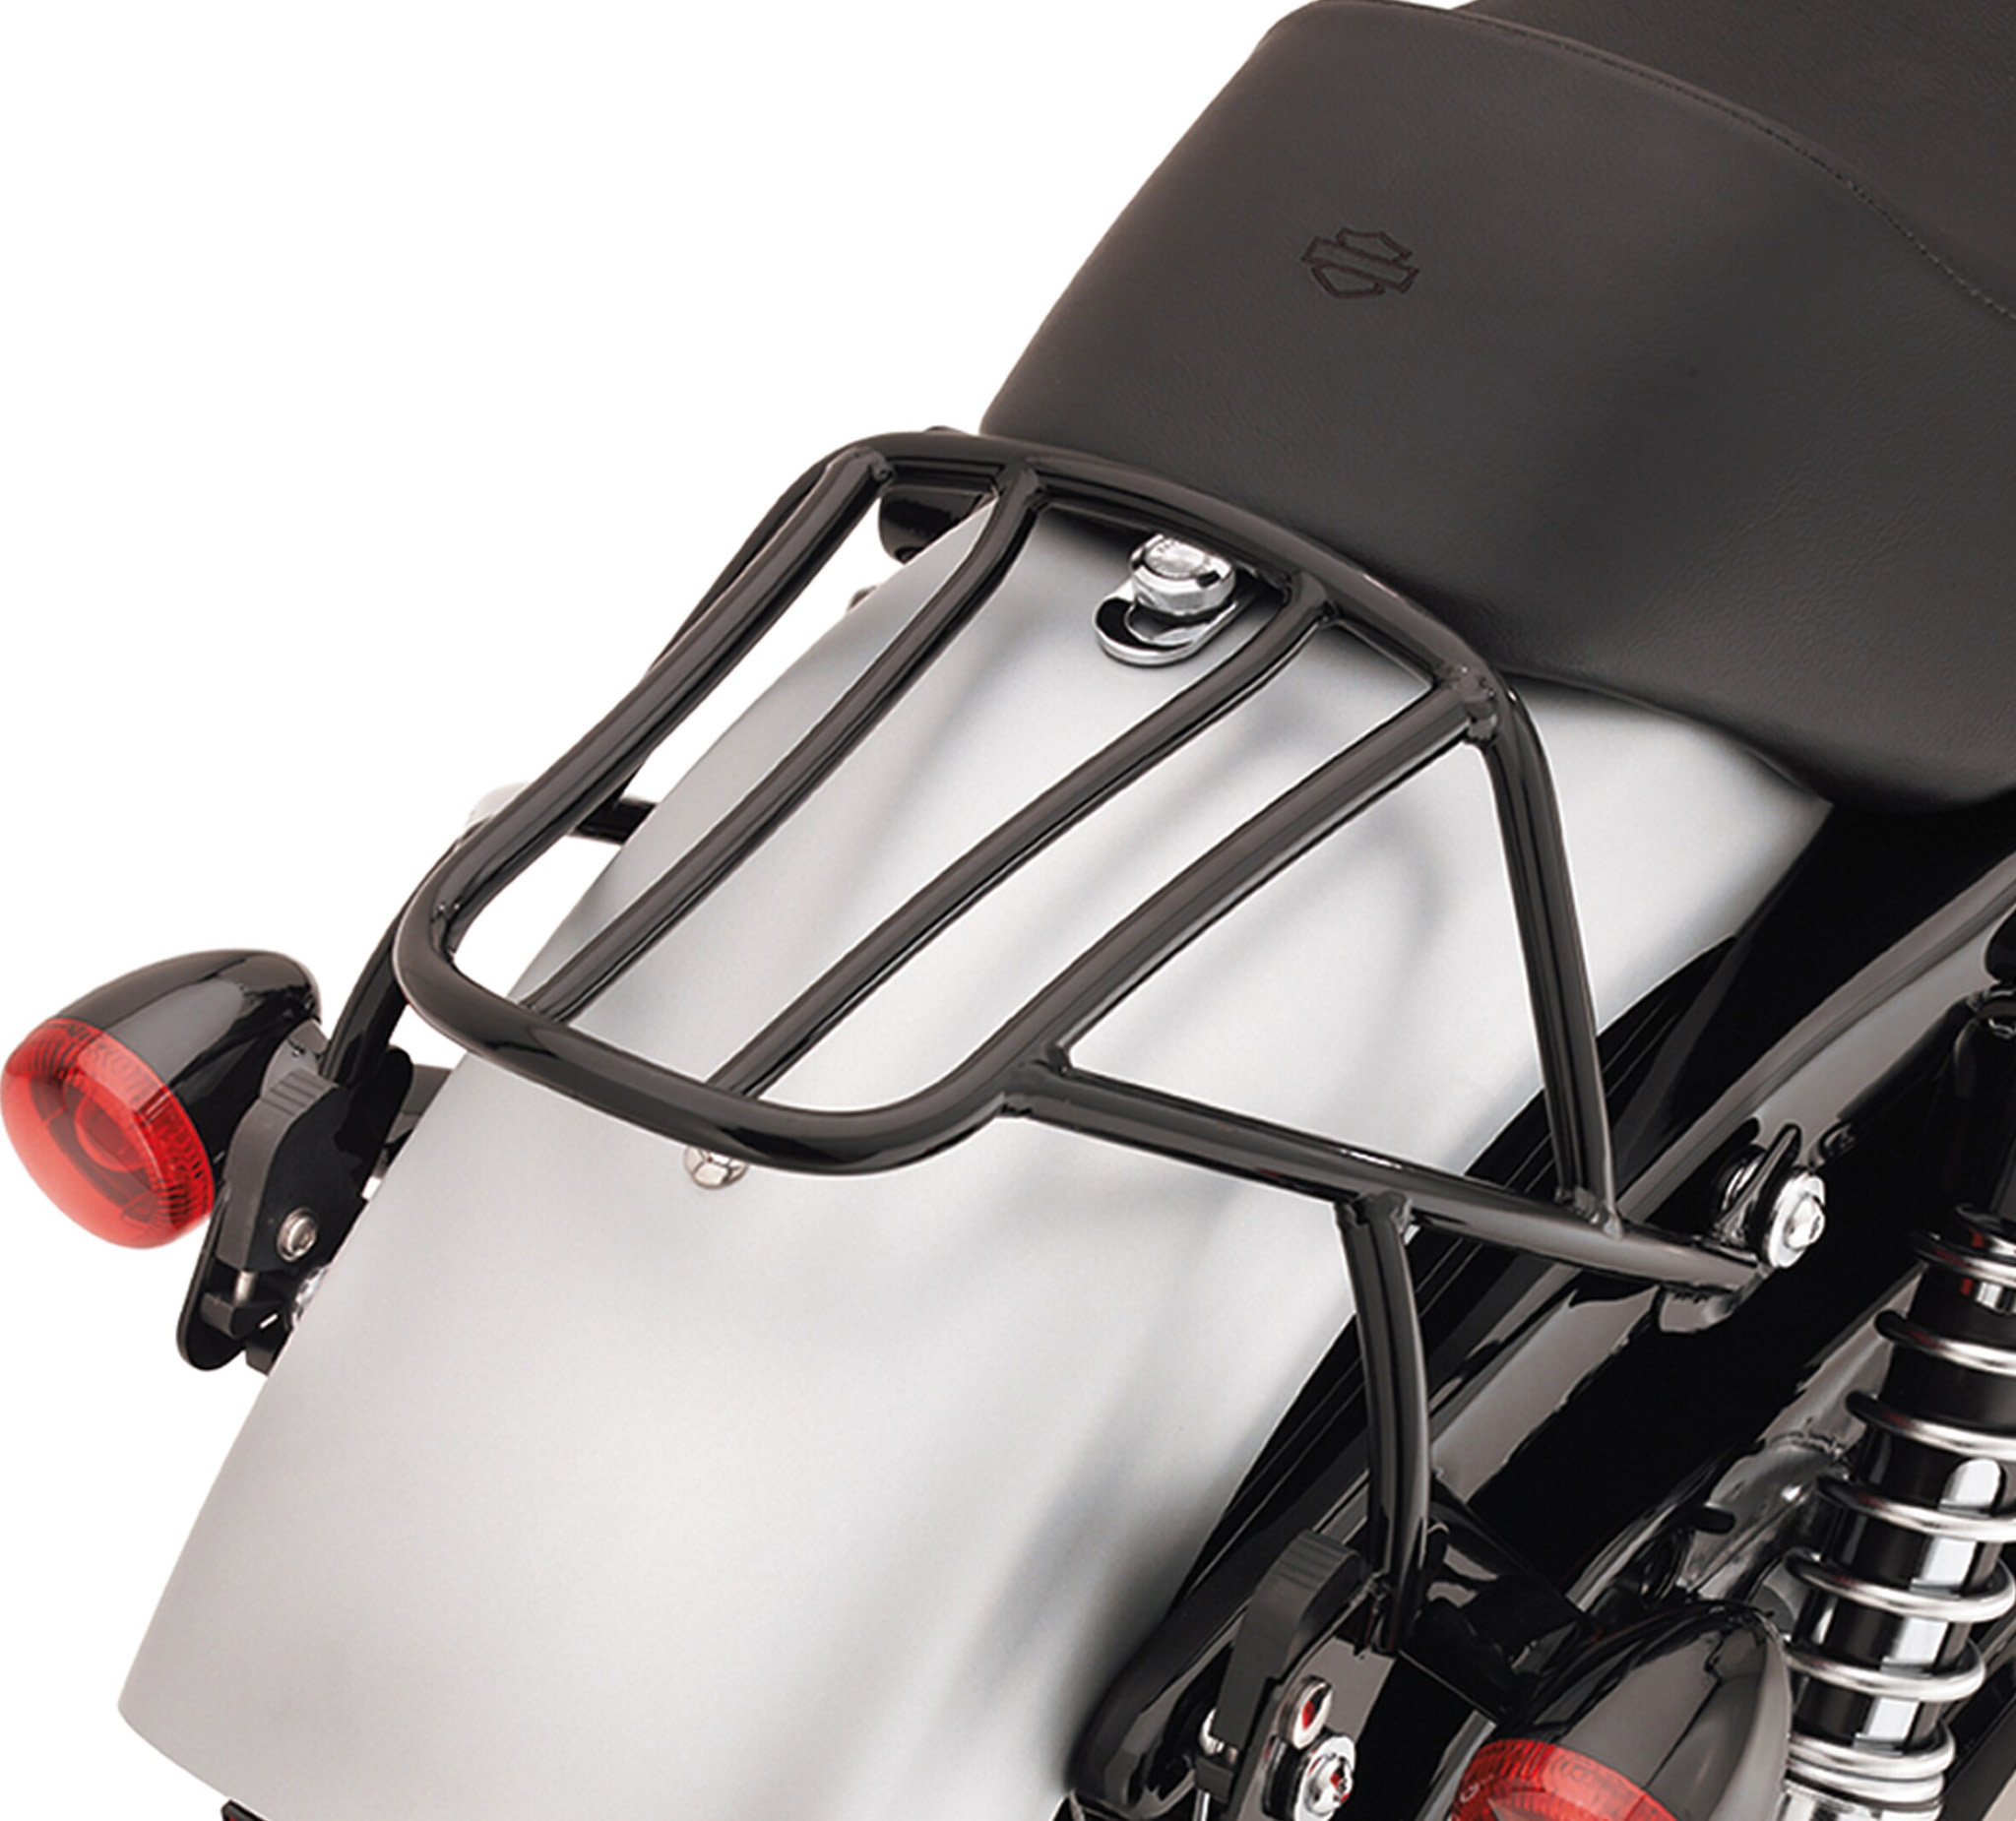 Chrome Detachables Solo Luggage Rack For Harley Sportster XL 2004-18 Forty Eight 